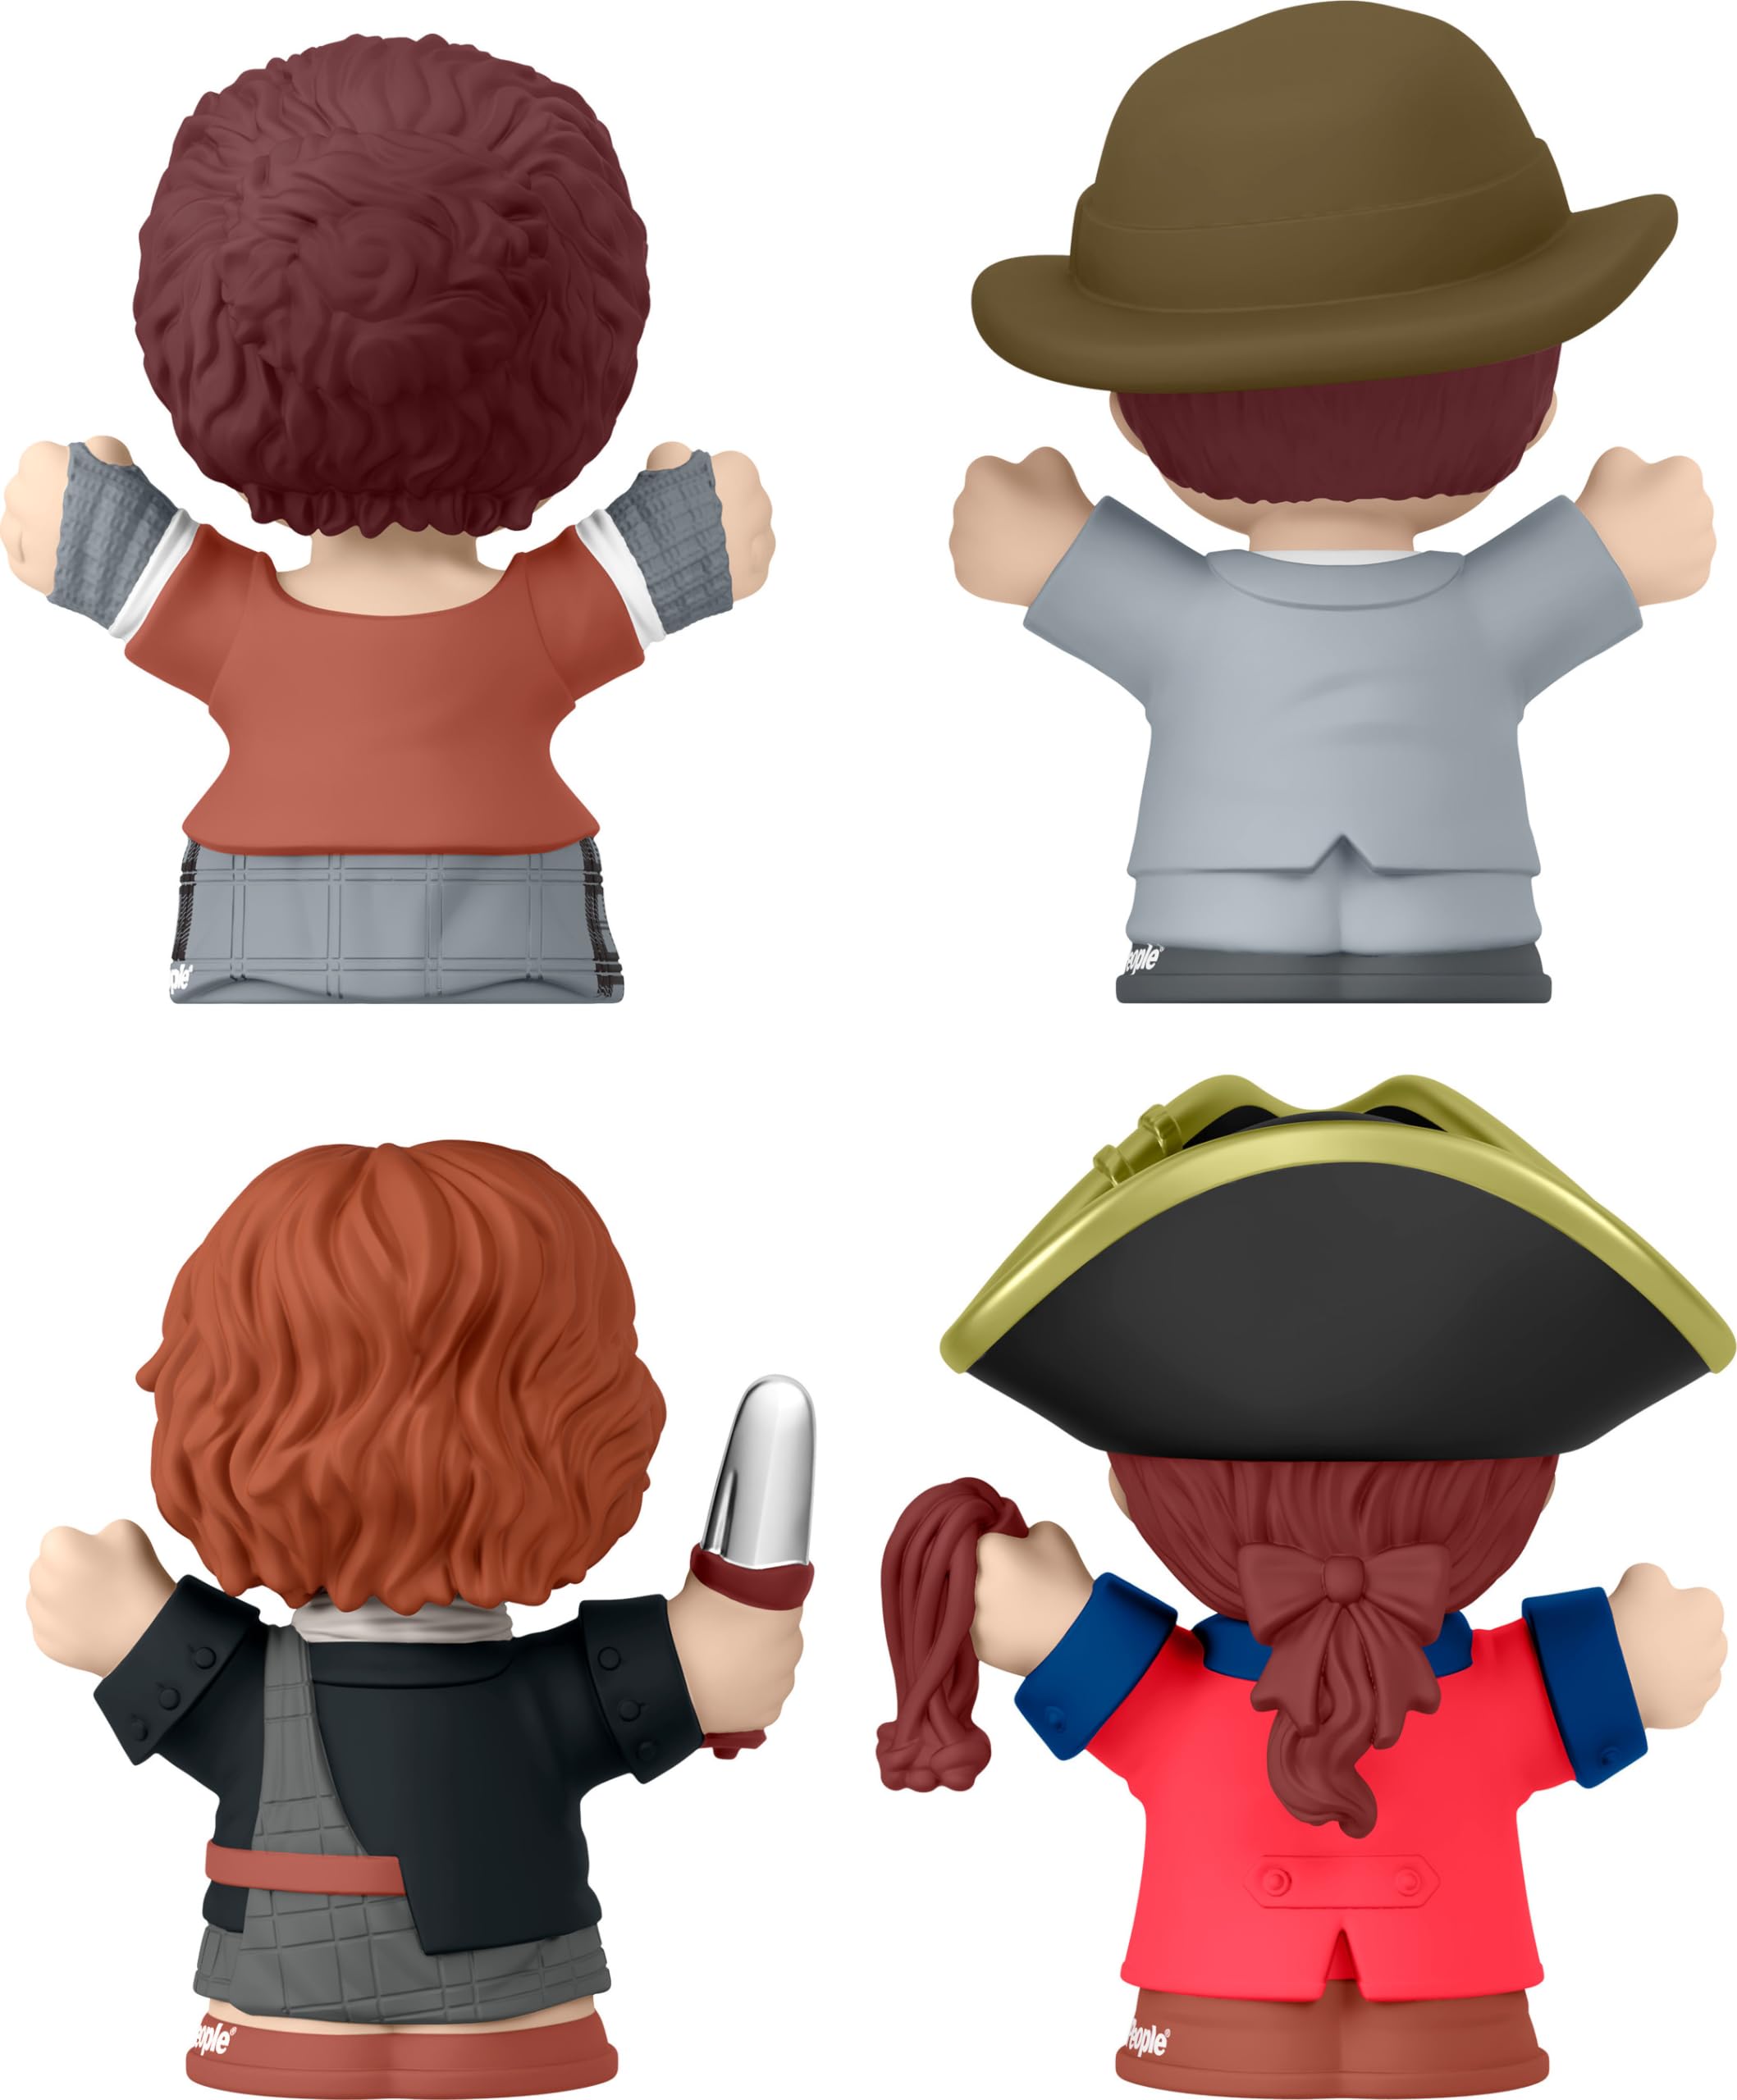 ​Little People Collector Outlander Special Edition Set with Claire & Jamie Fraser in a Display Gift Box for Adults & Fans, 4 Figures